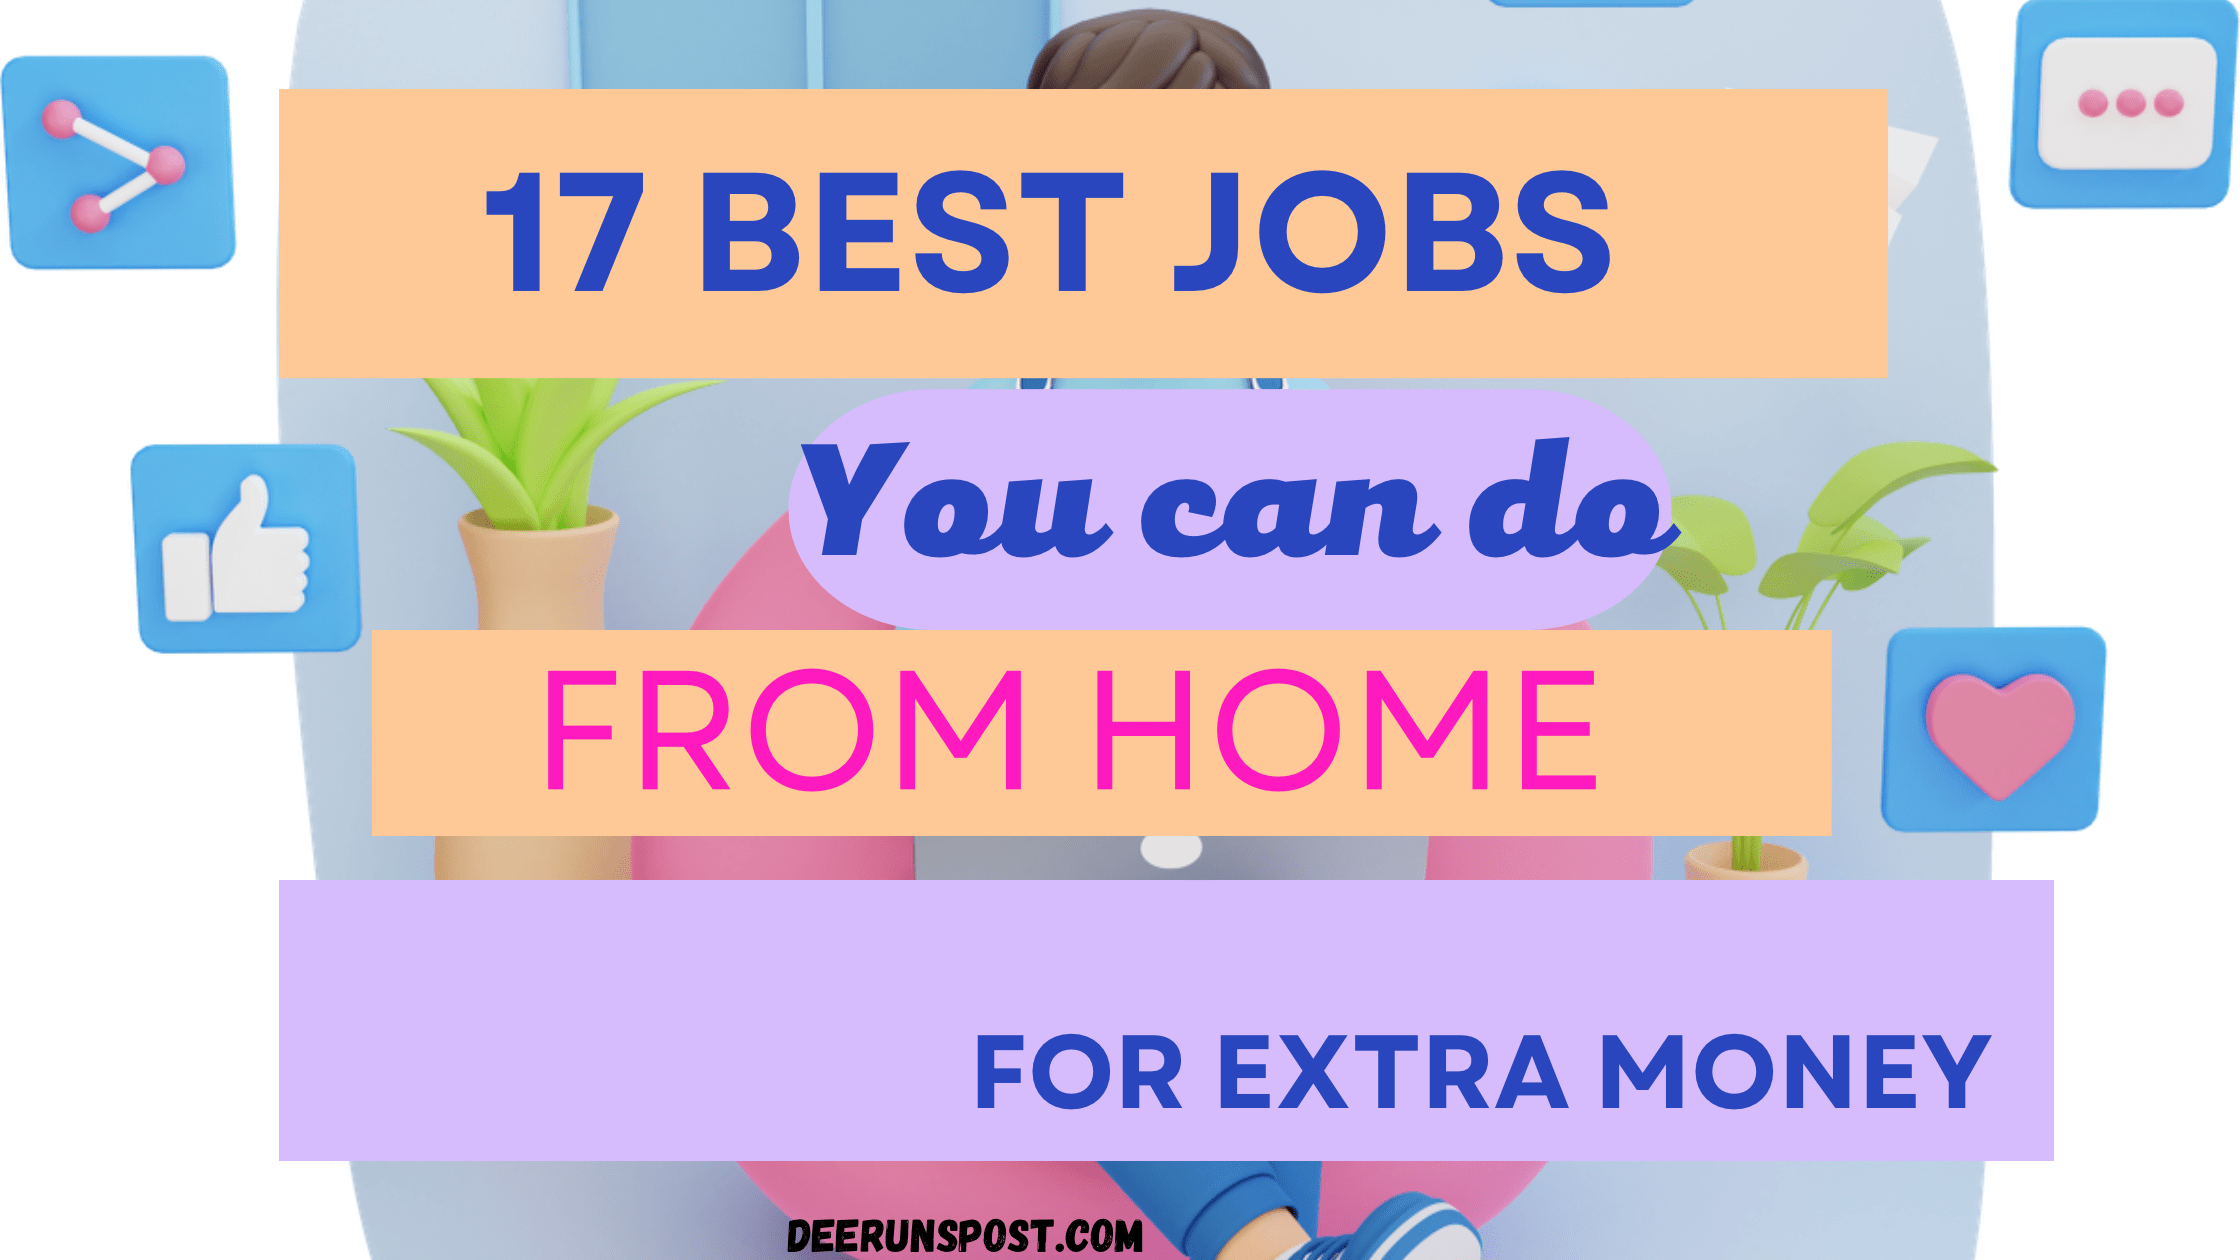 17 Best jobs to do from home to make extra money